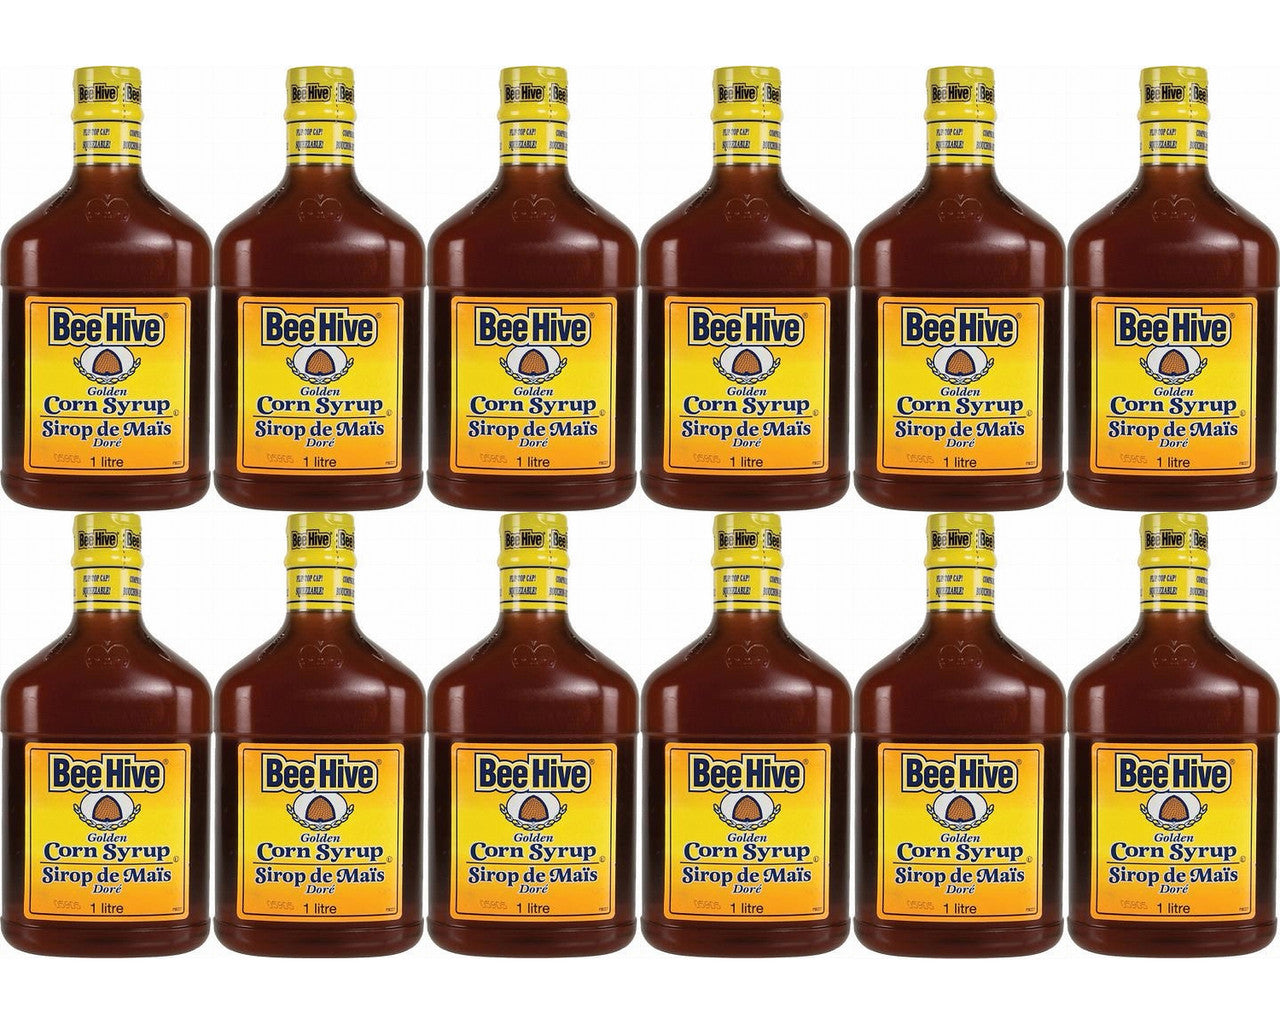 BeeHive Gluten Free Golden Corn Syrup,1 Litre/33.8oz., 12ct, {Imported from Canada}